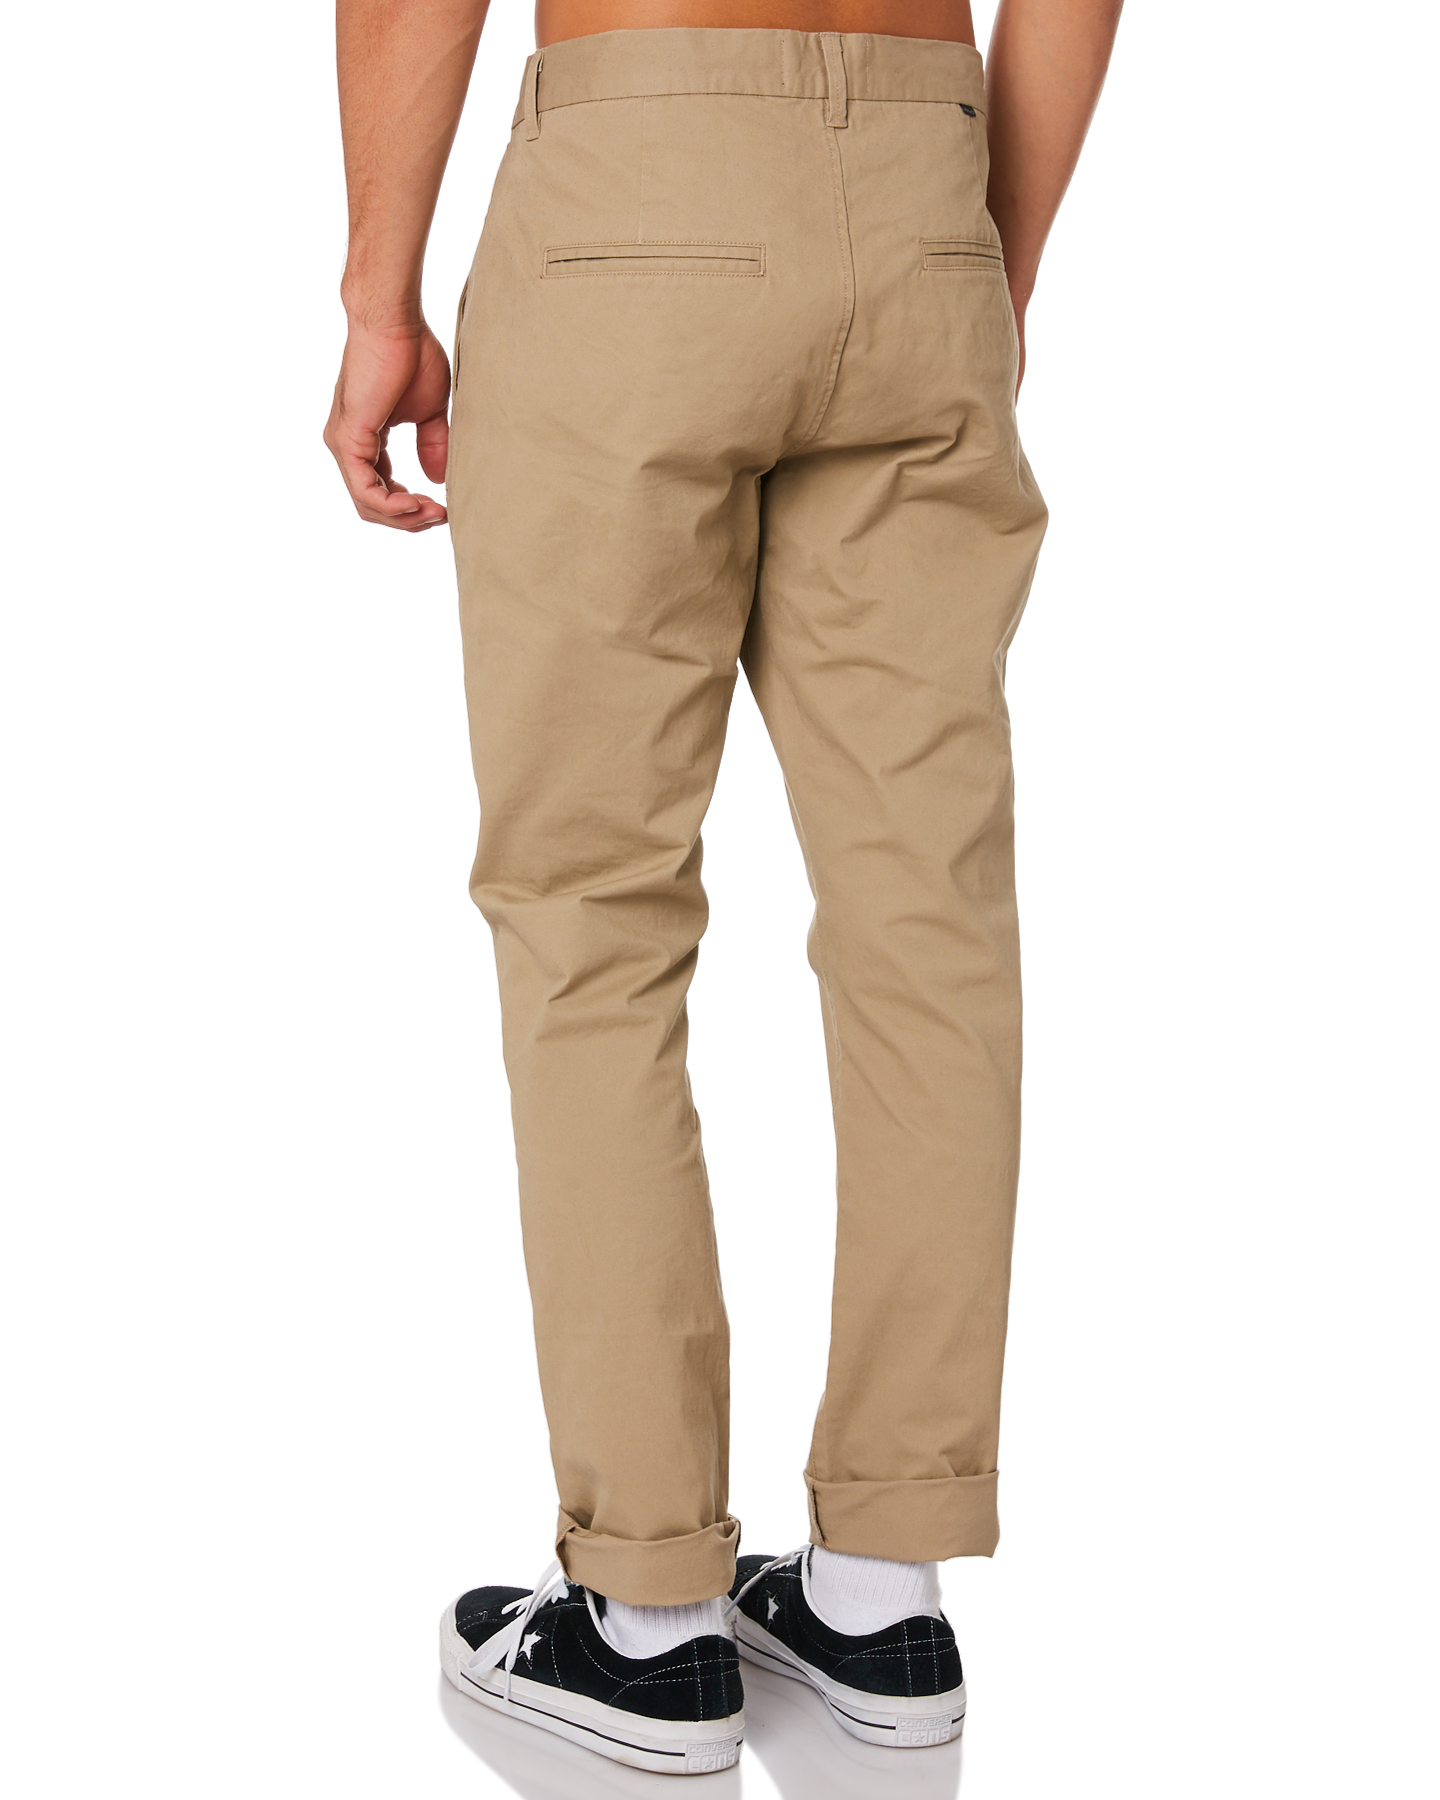 Rollas Relaxo Cropped Mens Pant - Sandman | SurfStitch